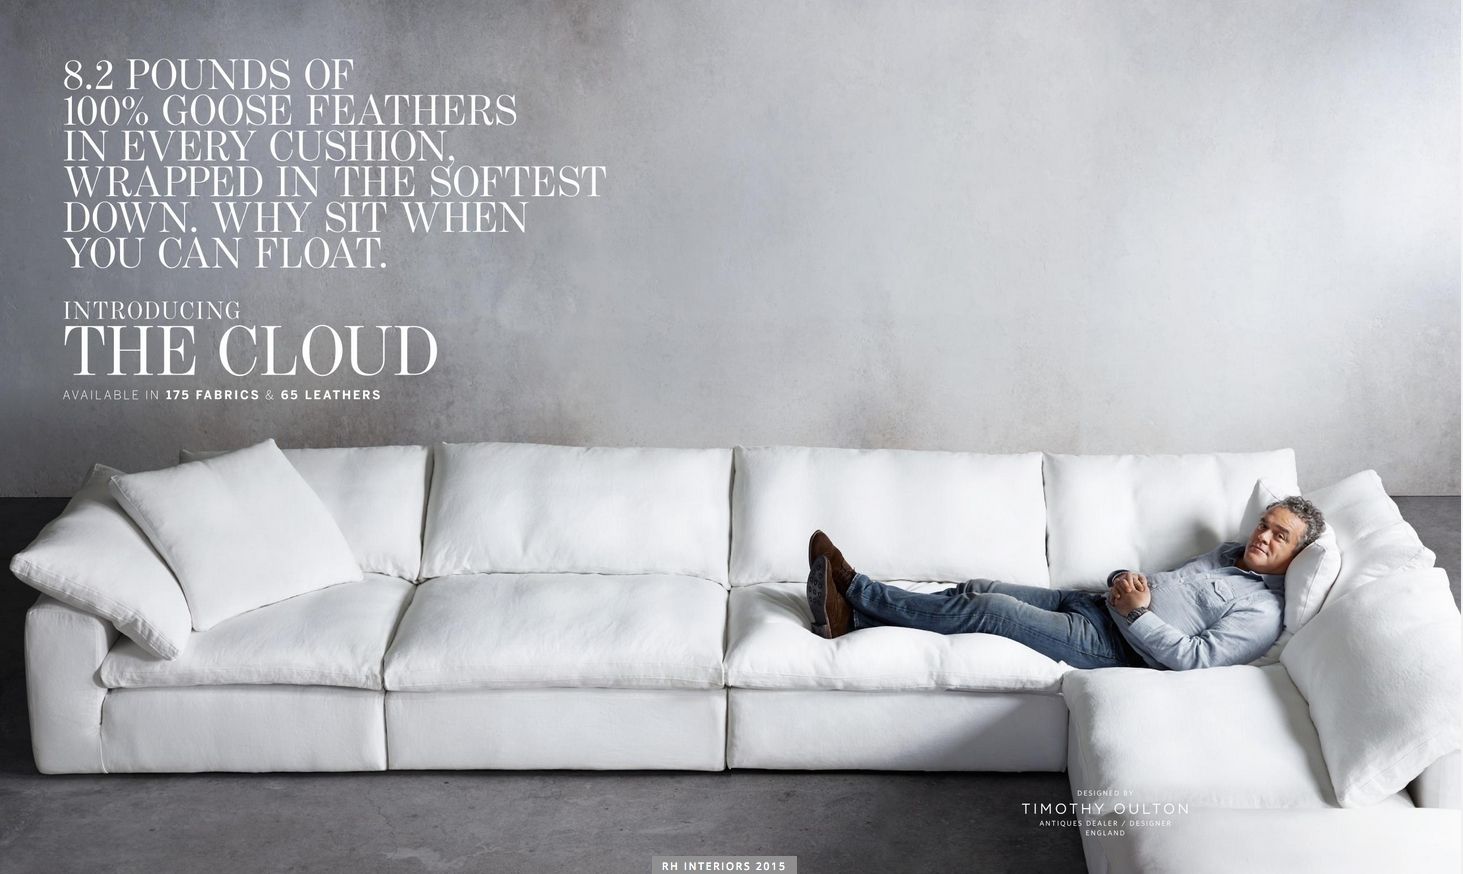 Test Road It Today! Love It! Gotta Have It! Restoration Hardware The Regarding Restoration Hardware Sectional Sofas (View 6 of 10)